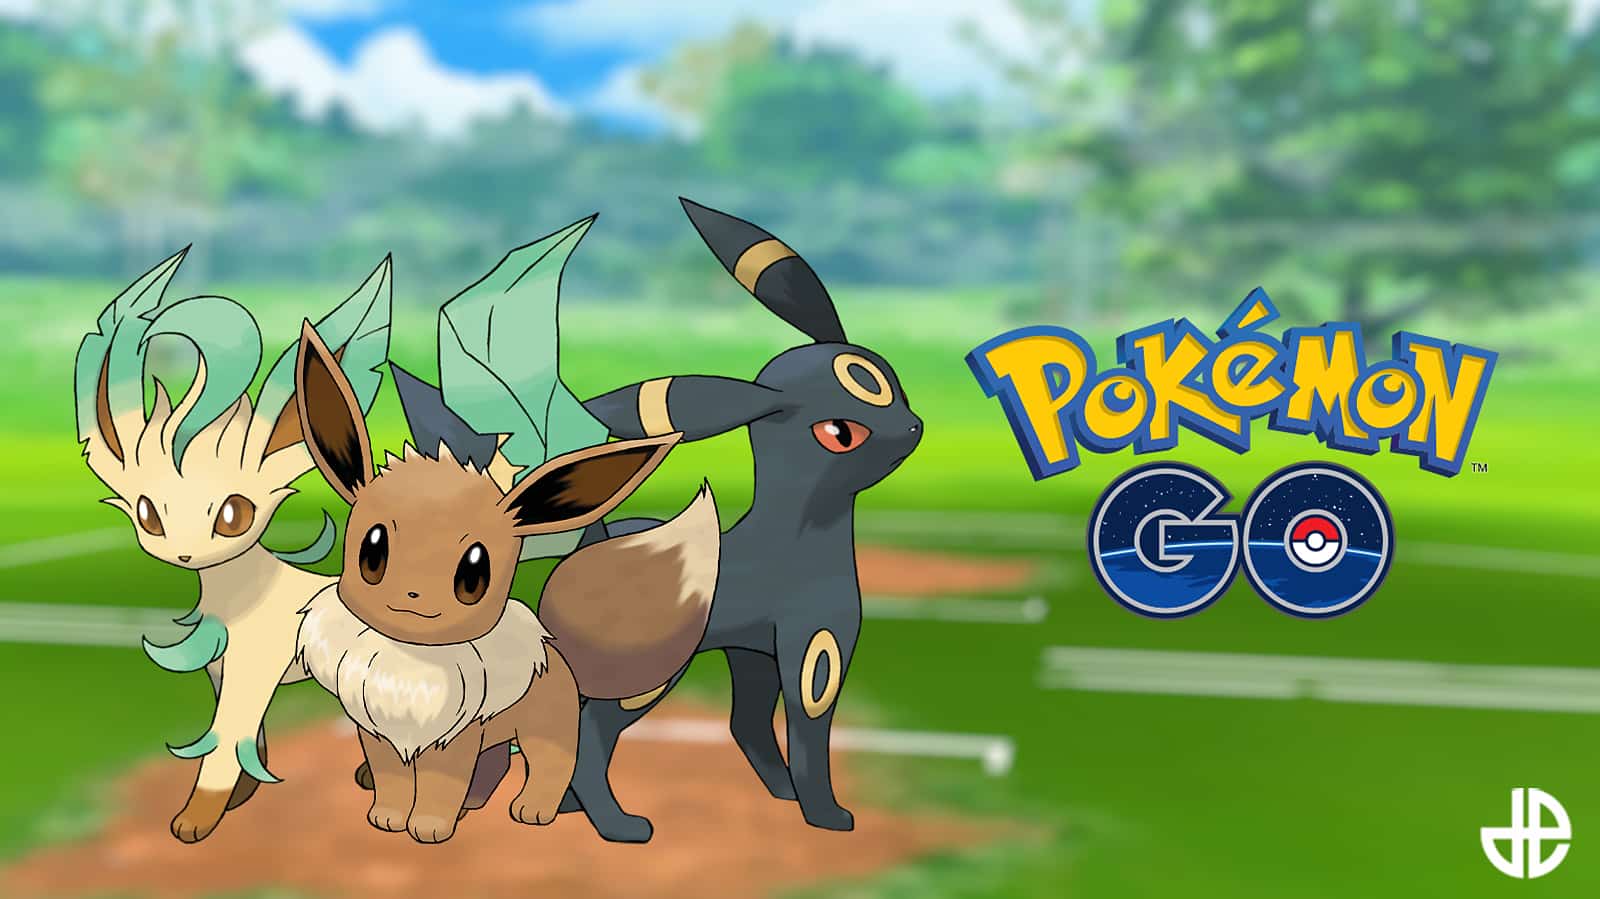 Eevee and its evolutions Umbreon and Leafeon with the Pokemon Go logo